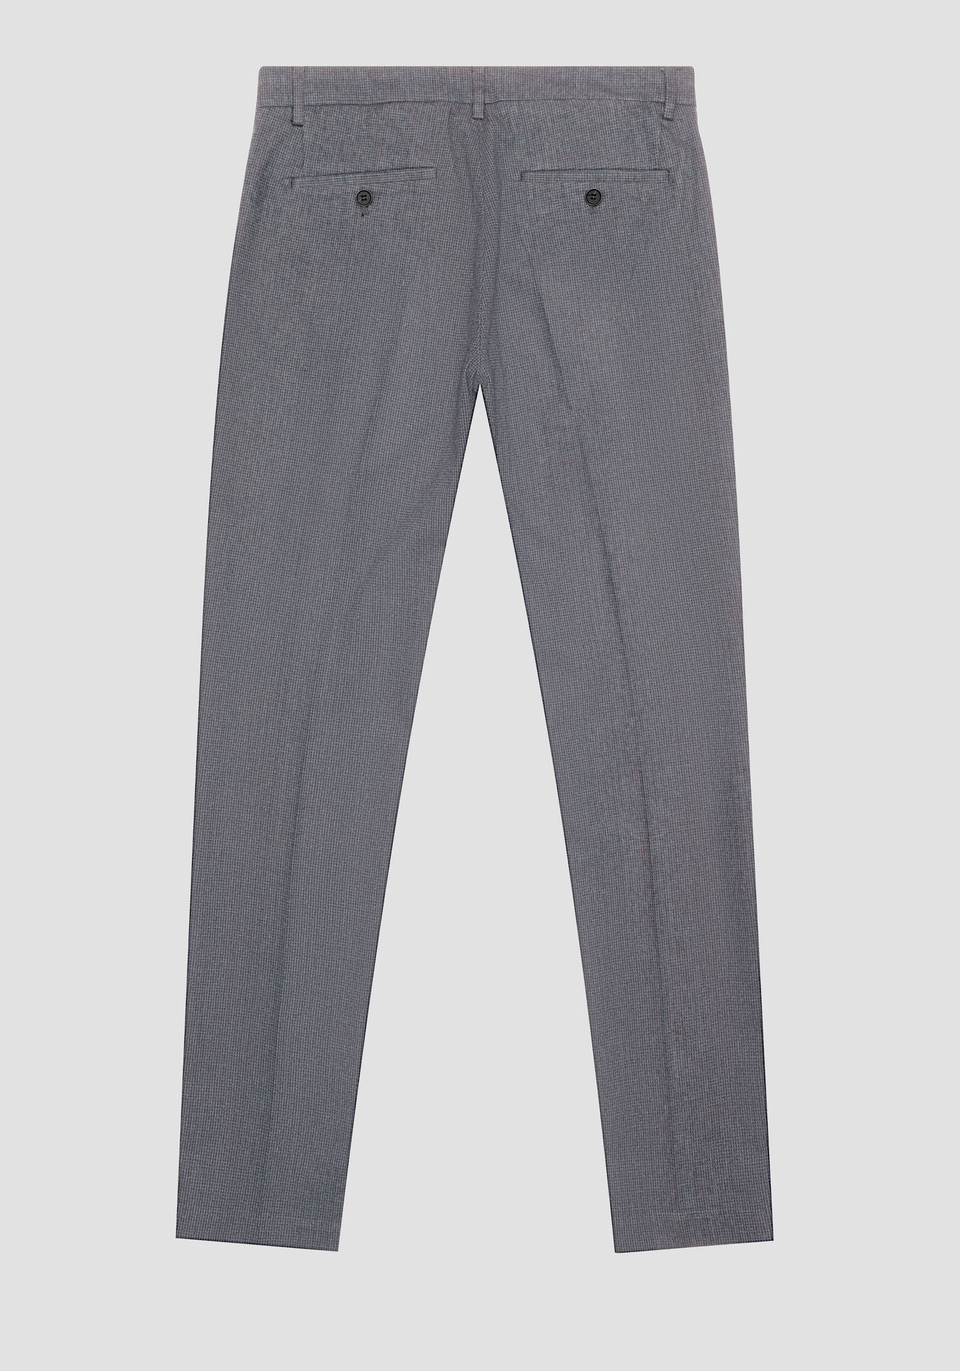 "BRYAN" SKINNY FIT TROUSERS IN ELASTICATED REINFORCED COTTON BLEND - Antony Morato Online Shop